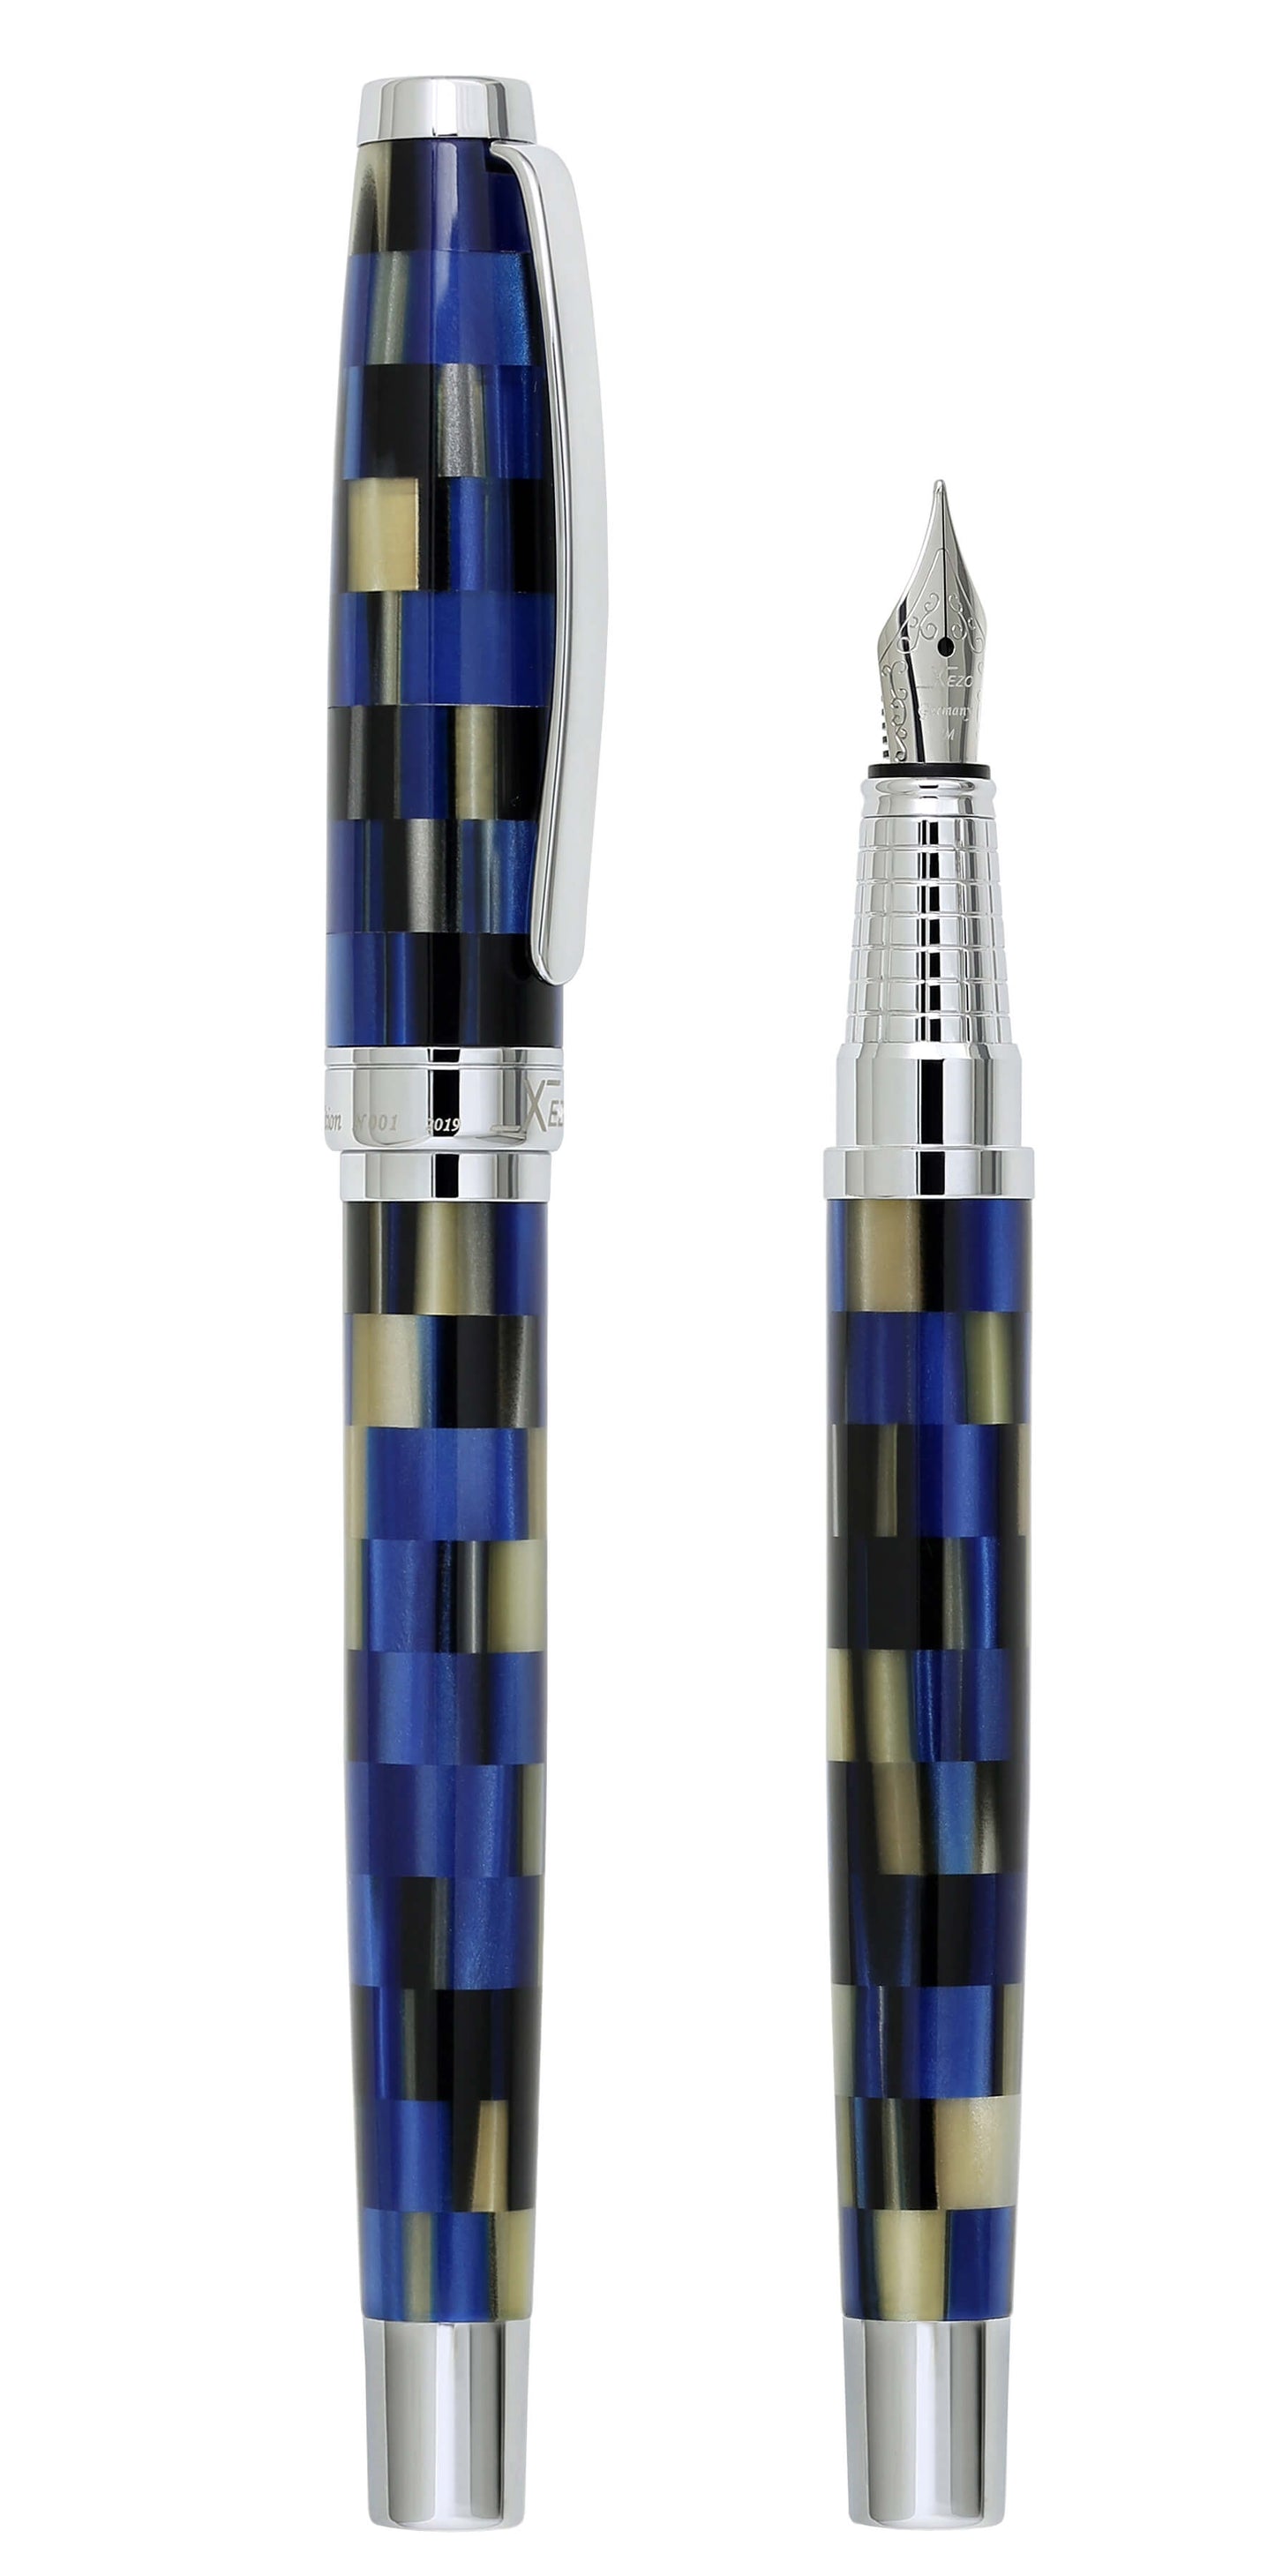 Xezo – Comparison between 3/4 view of capped and uncapped Urbanite Blue FM fountain pens